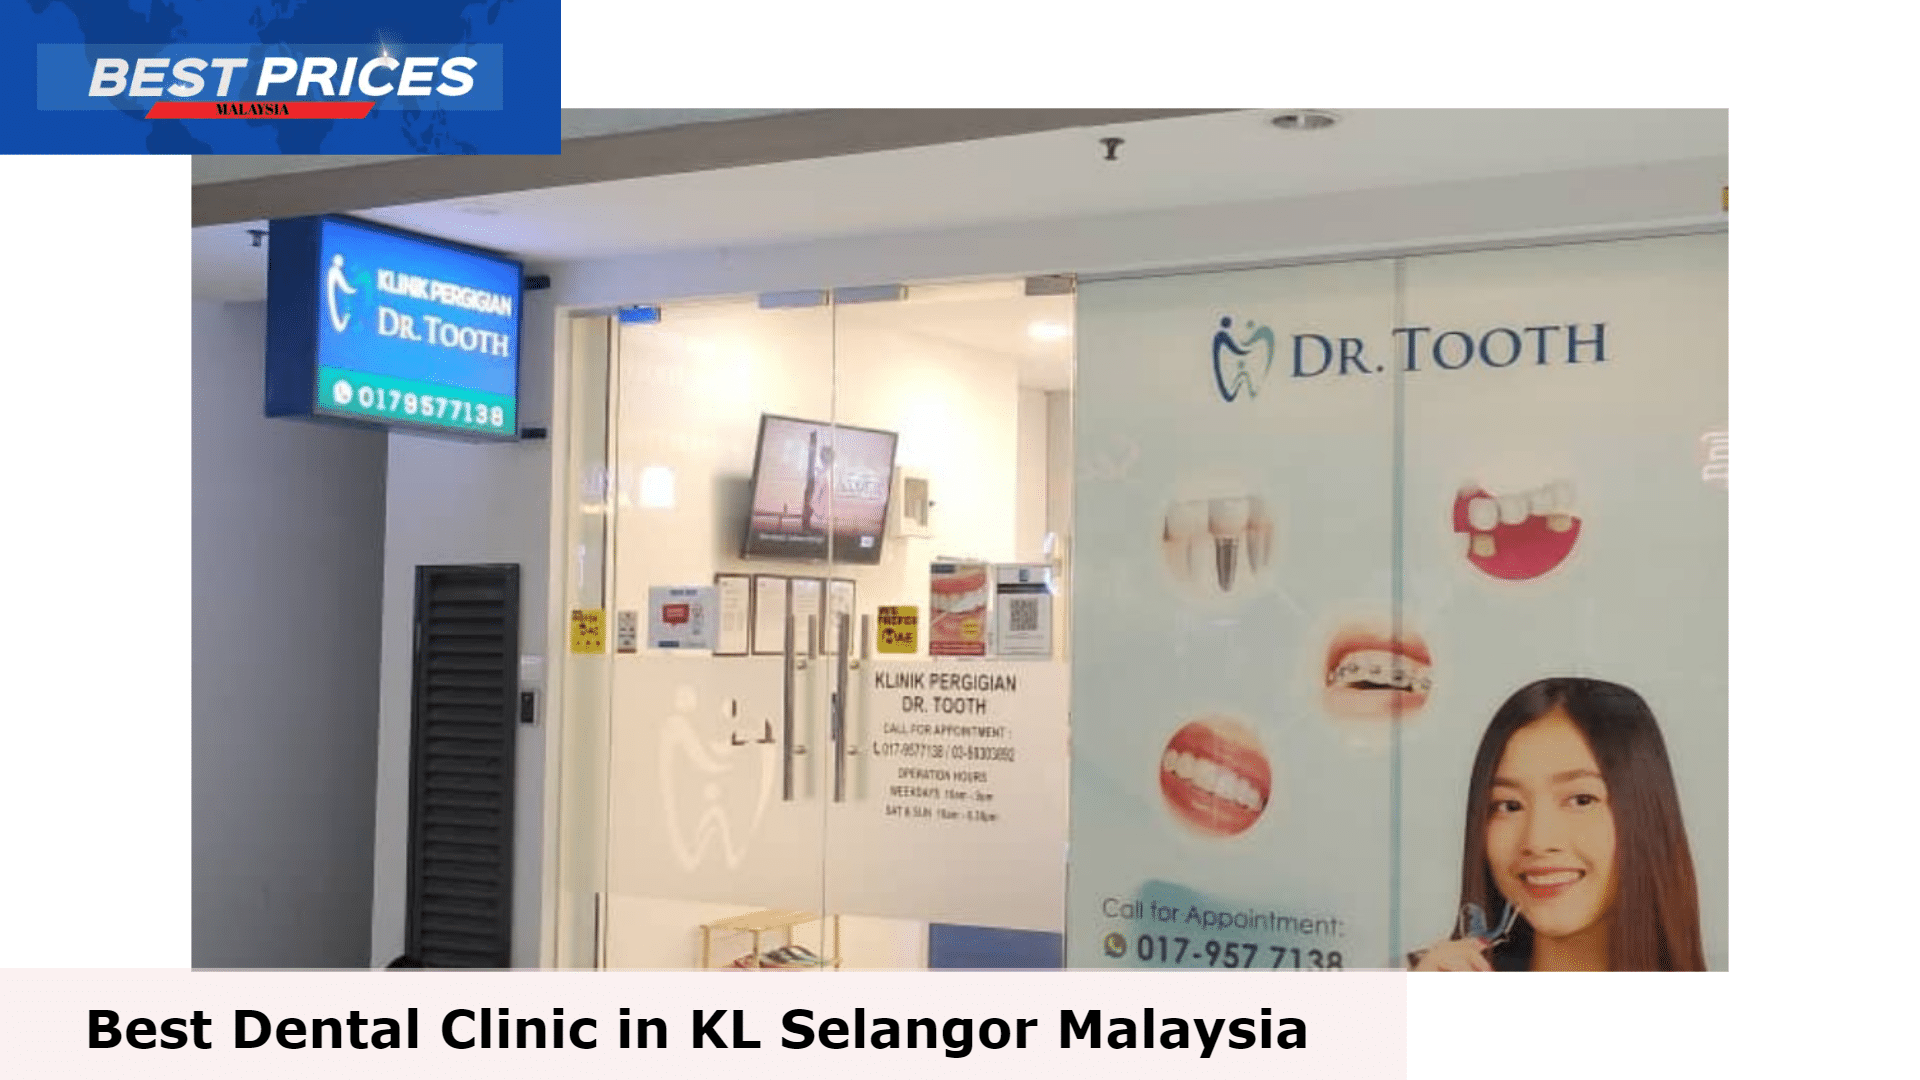 Dr. Tooth Dental Clinic - Best Dental Clinic in KL Selangor Malaysia, Dental Clinic Kuala Lumpur Selangor Malaysia, Best Trusted and Certified Dental Clinics in Kuala Lumpur, dental clinic near me, cheapest dental clinic near me, cheapest dentist in kl, dental clinic near me with price, best dental clinic in kl, government dental clinic near me, best dental clinic near me, Are dentists affordable in Malaysia?, How much does dental filling cost in Malaysia?, How much is dental cleaning at Polyclinic?, Does Malaysia have enough dentist?,